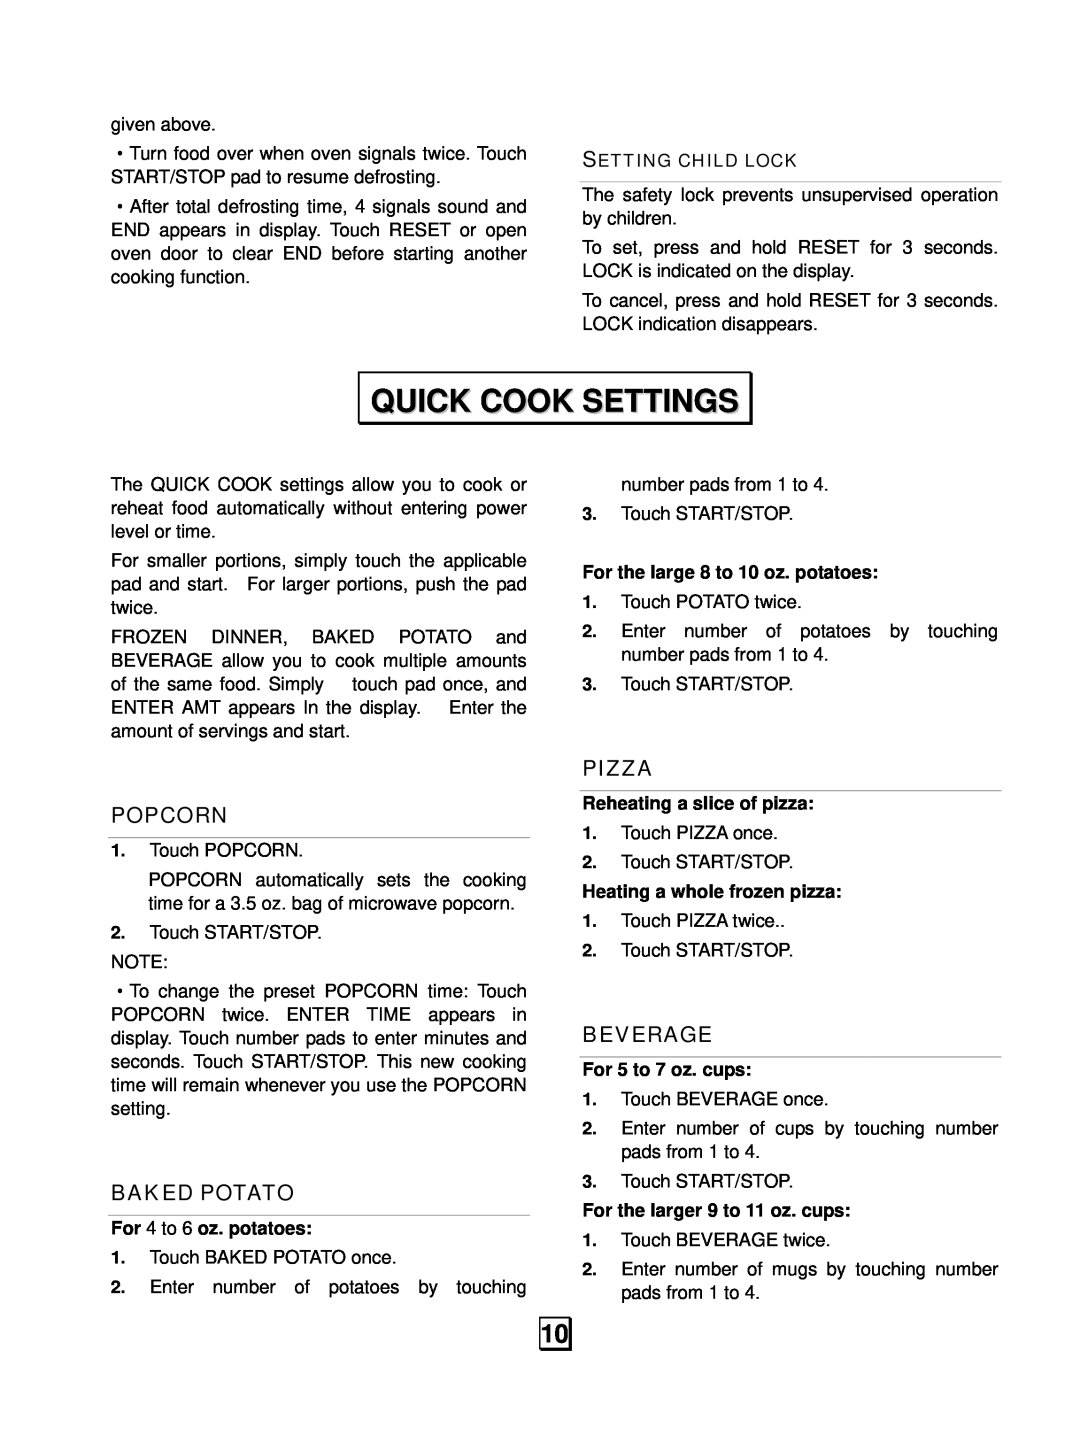 RCA RMW948 owner manual Quick Cook Settings, Popcorn, Baked Potato, Pizza, Beverage 